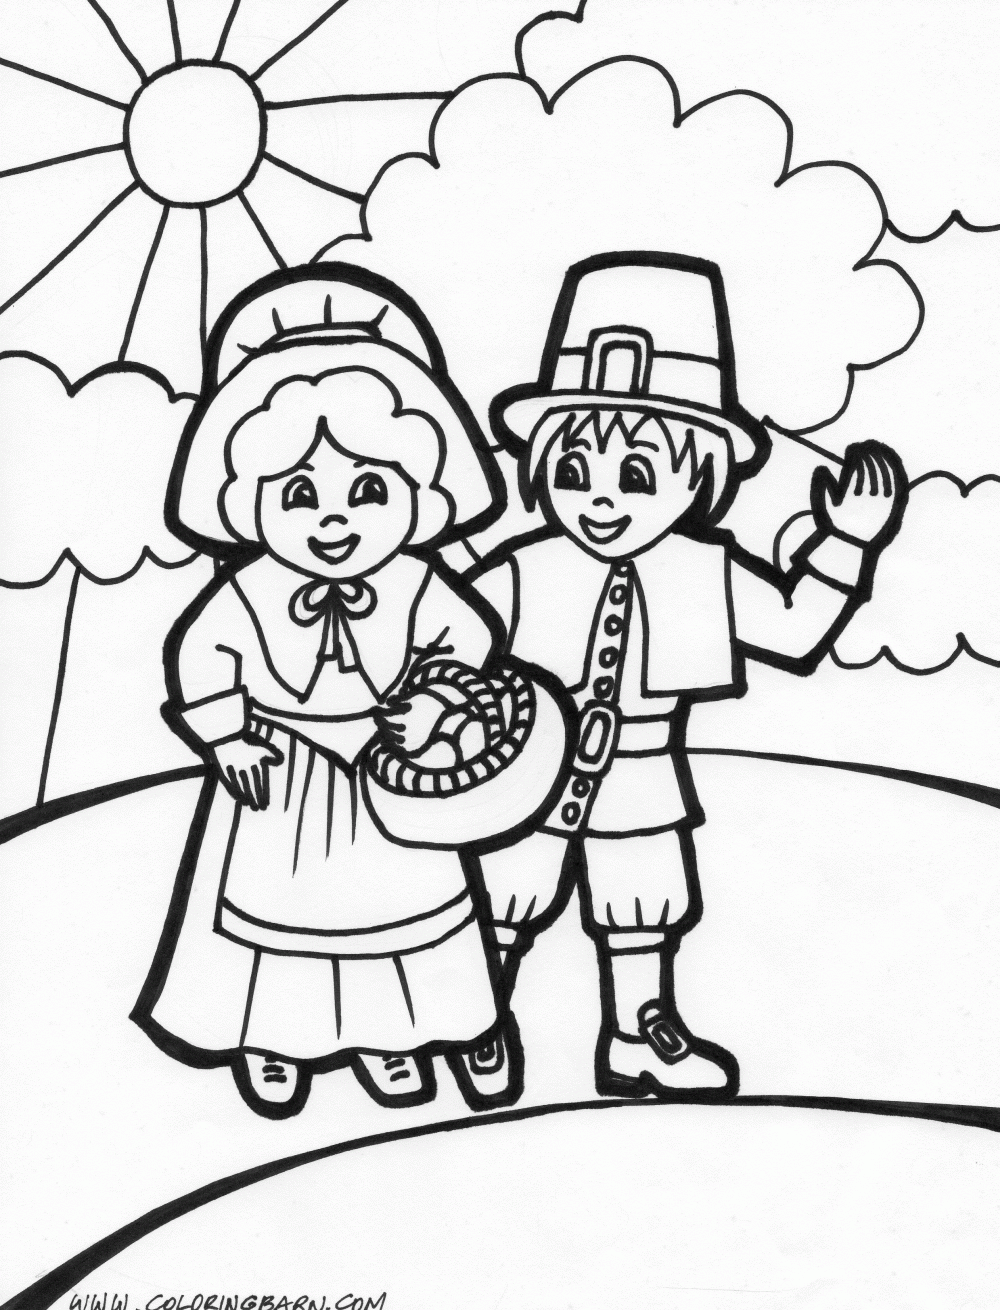 Thanksgiving Coloring Pictures For Kids COLORING PAGES FOR KIDS FREE 